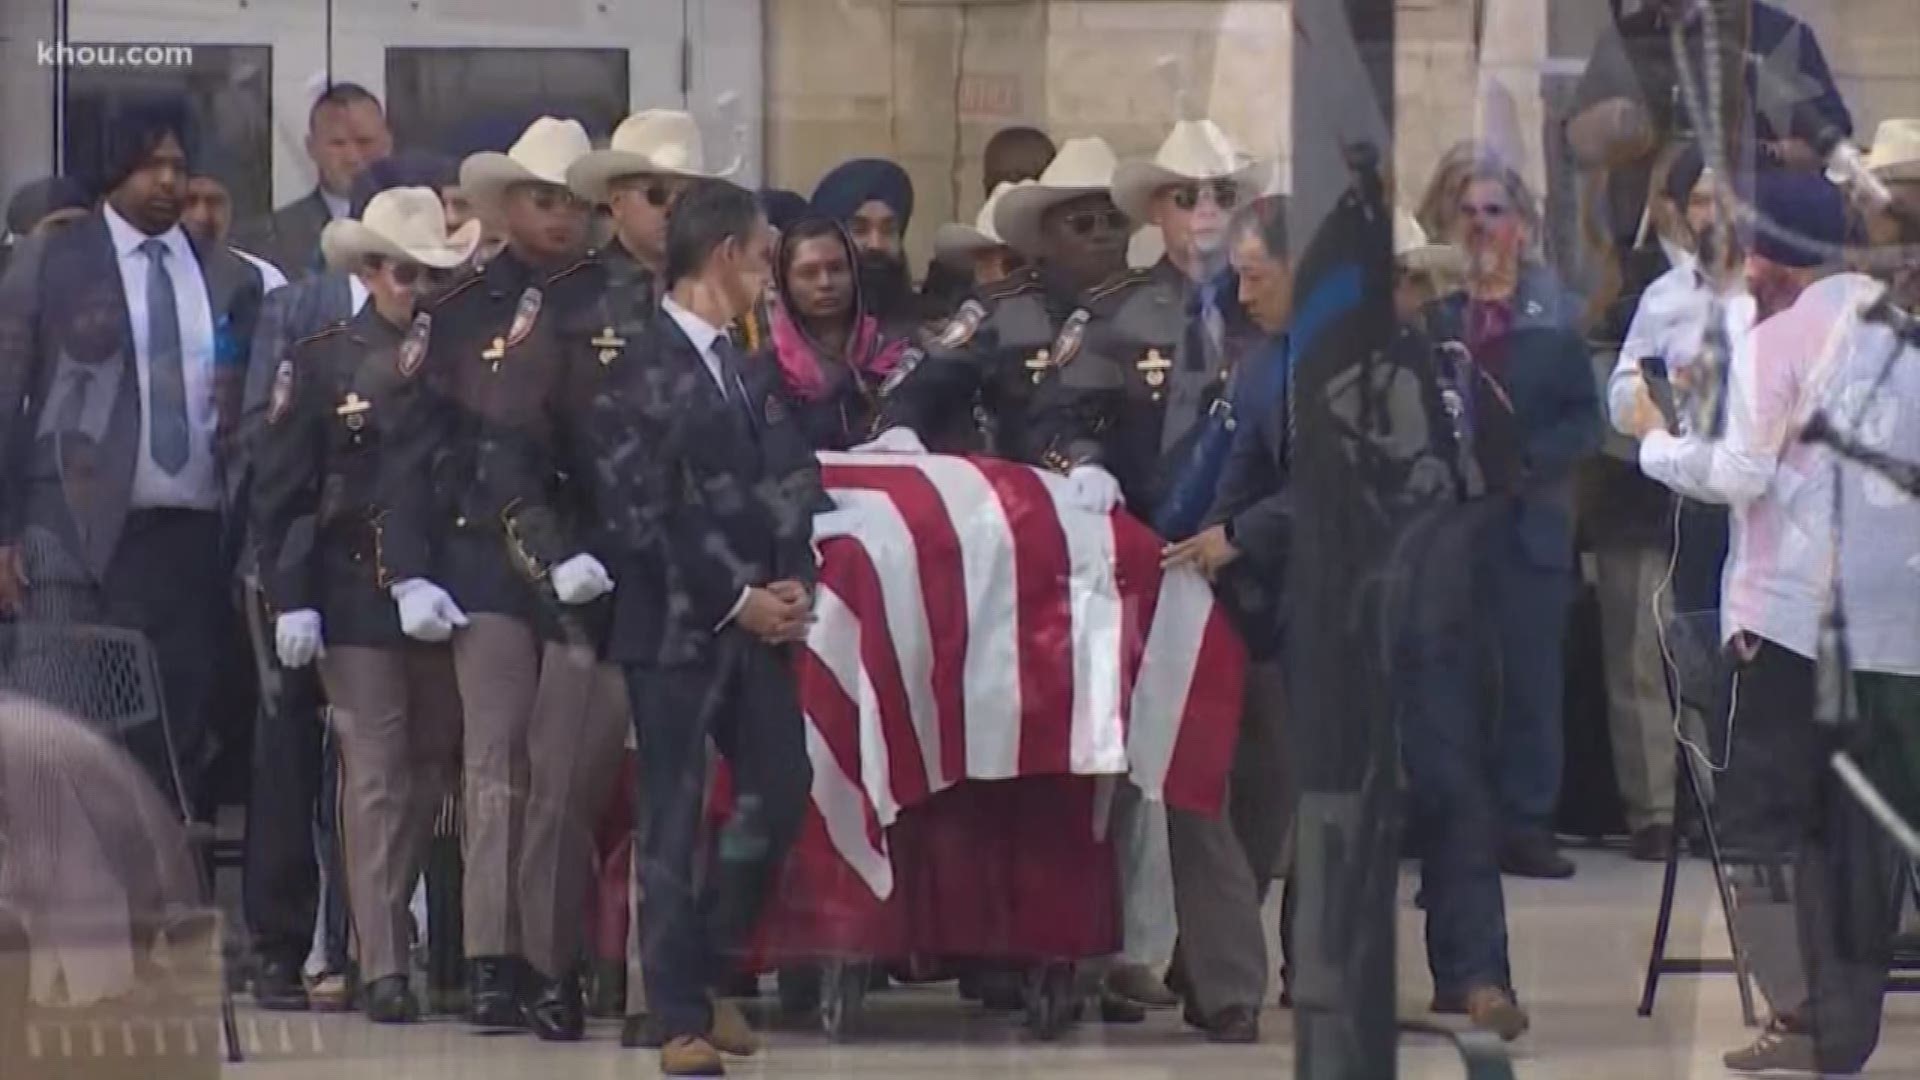 Hundreds gathered to honor the life of fallen Harris County Sheriff's deputy who was gunned down during a traffic stop.